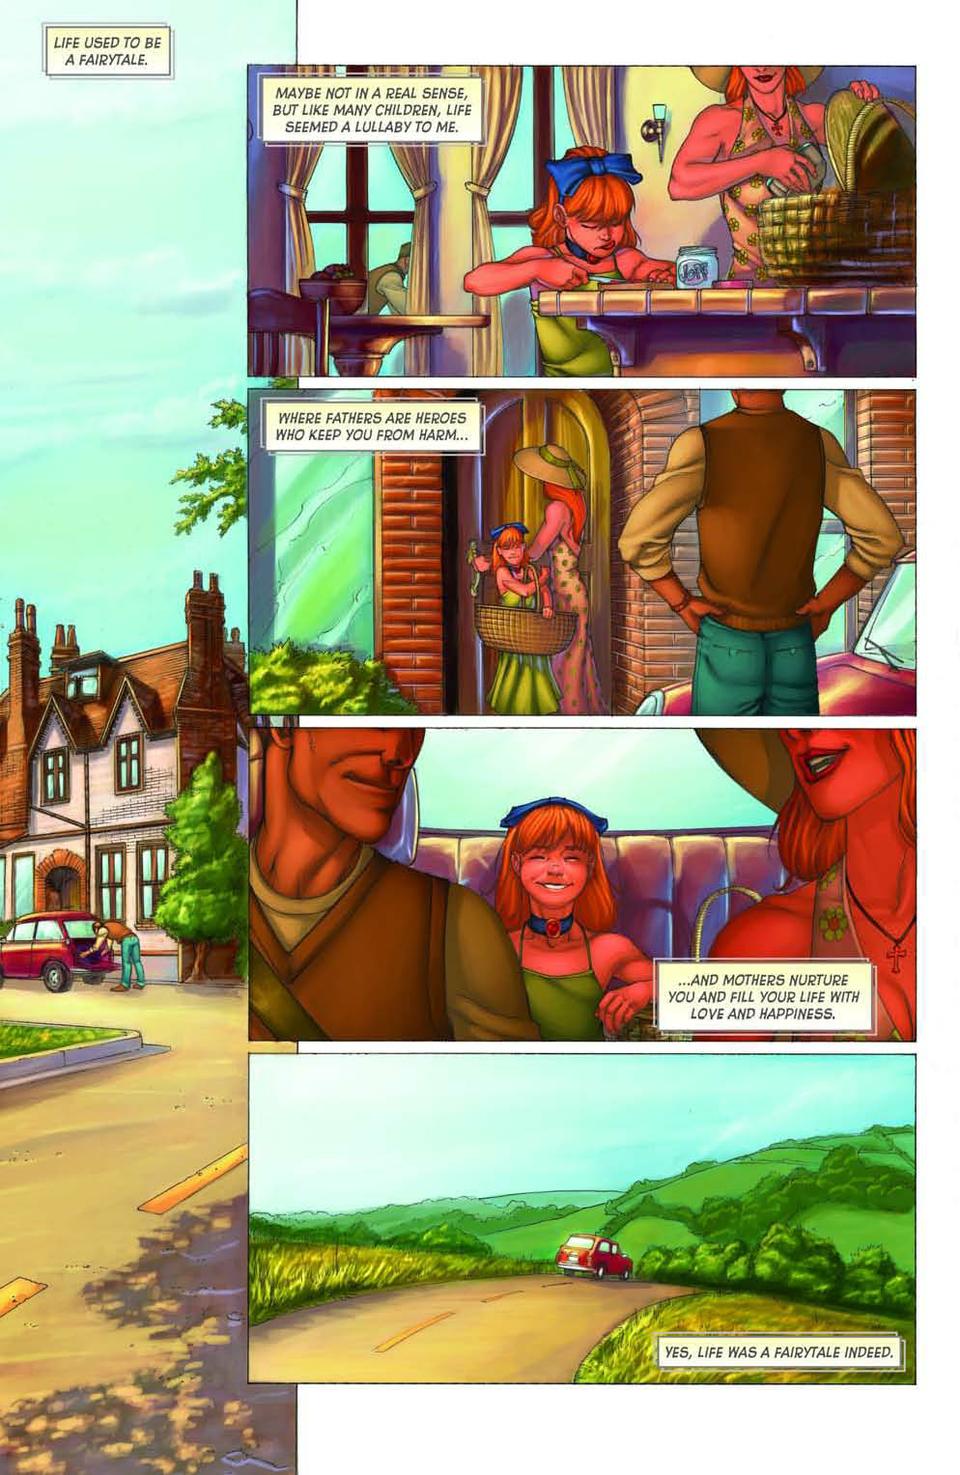 Chapter 1 page 1